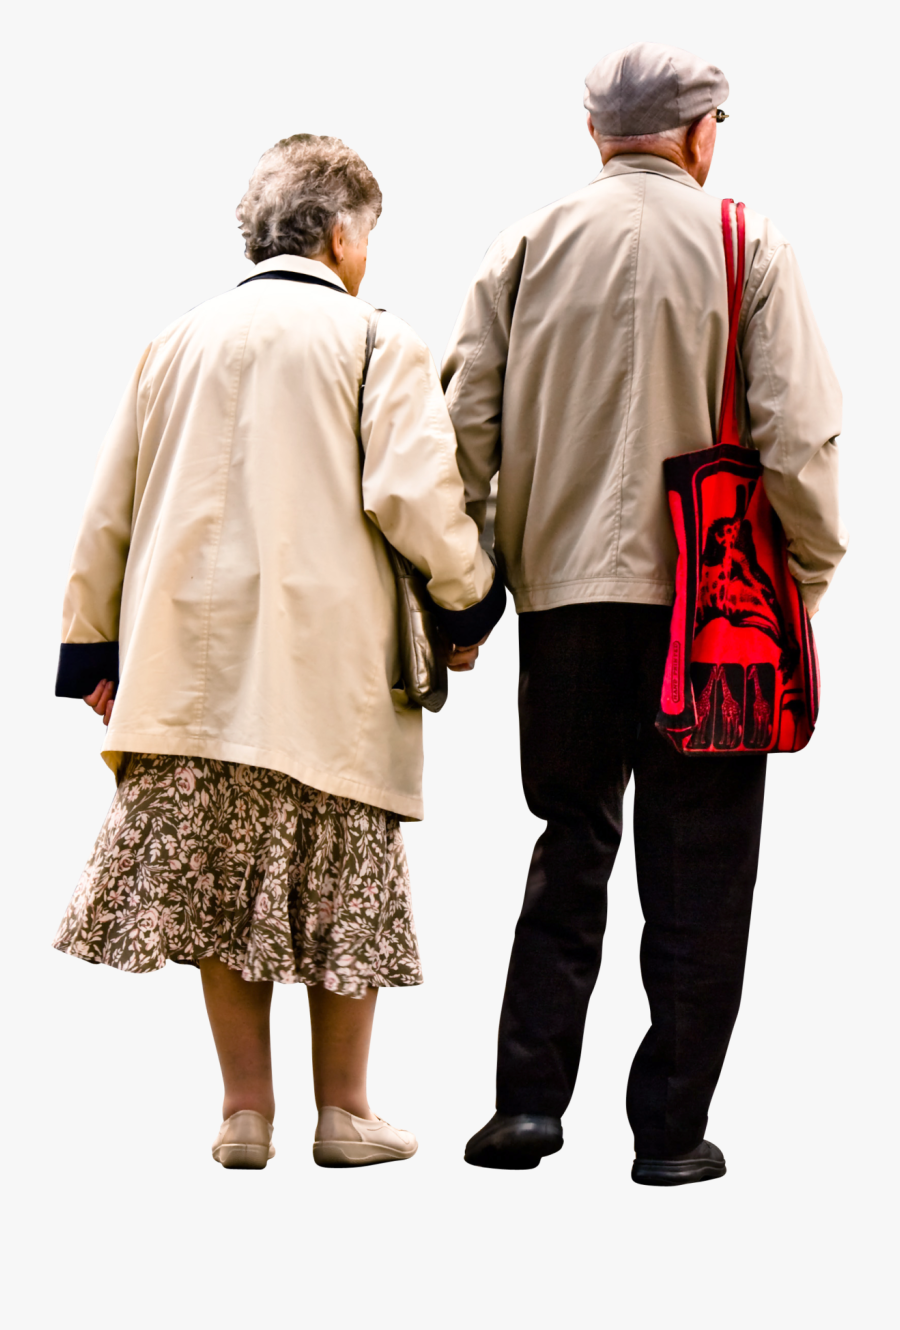 Elderly Couple Holding Hands Walking Garry Knight/cc-attribution - Old People Walking Png, Transparent Clipart